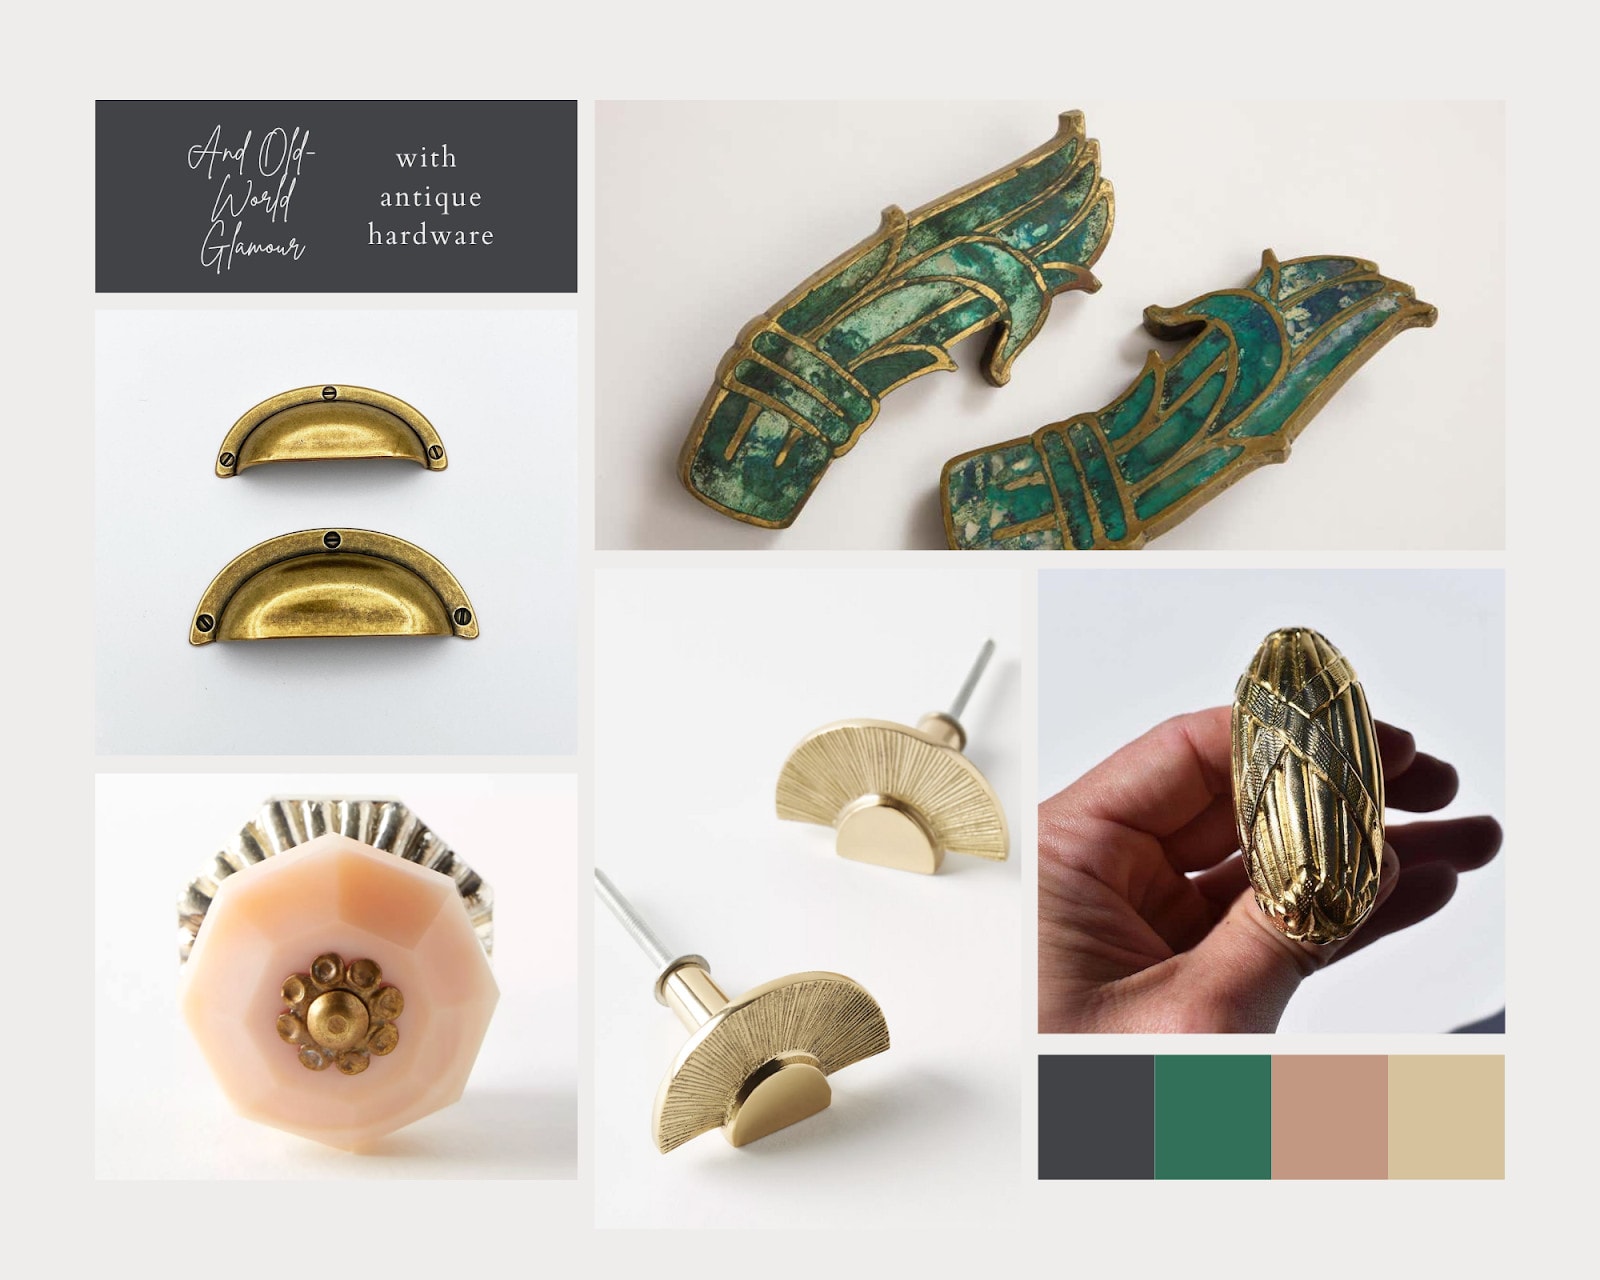 Vintage and antique-inspired knobs and drawer pulls for laundries